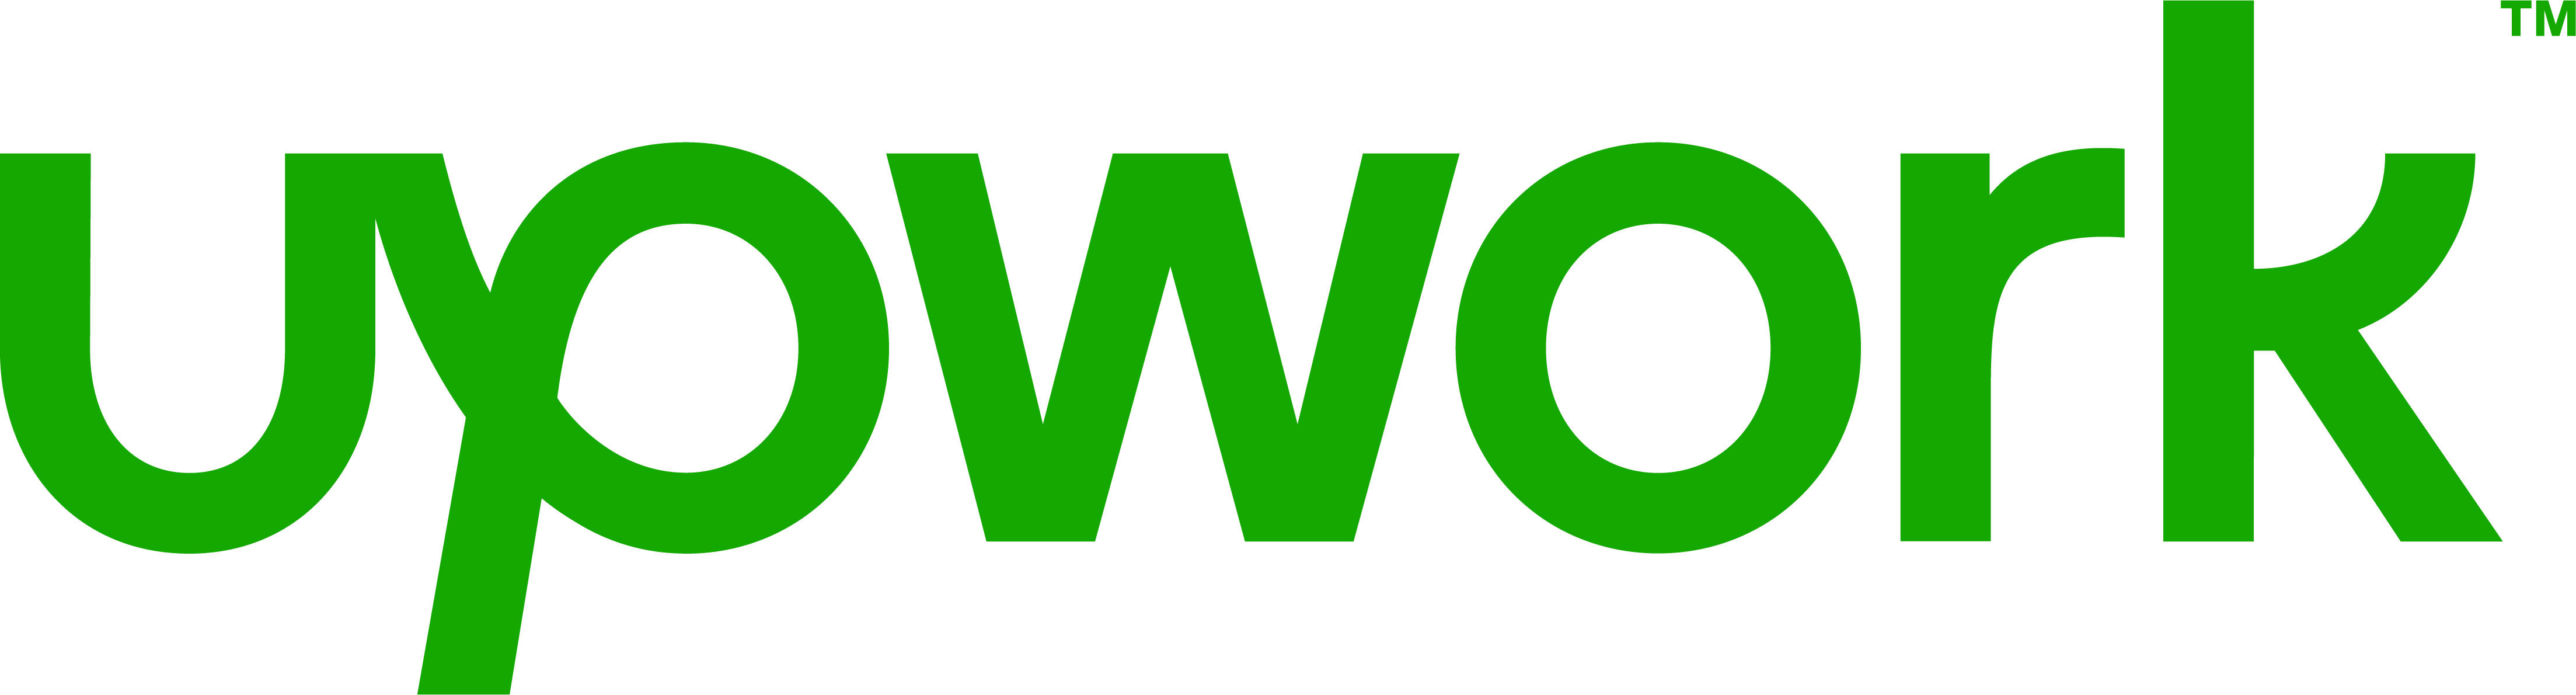 upwork rebrands, launches global campaign reflecting the new way we work | business wire